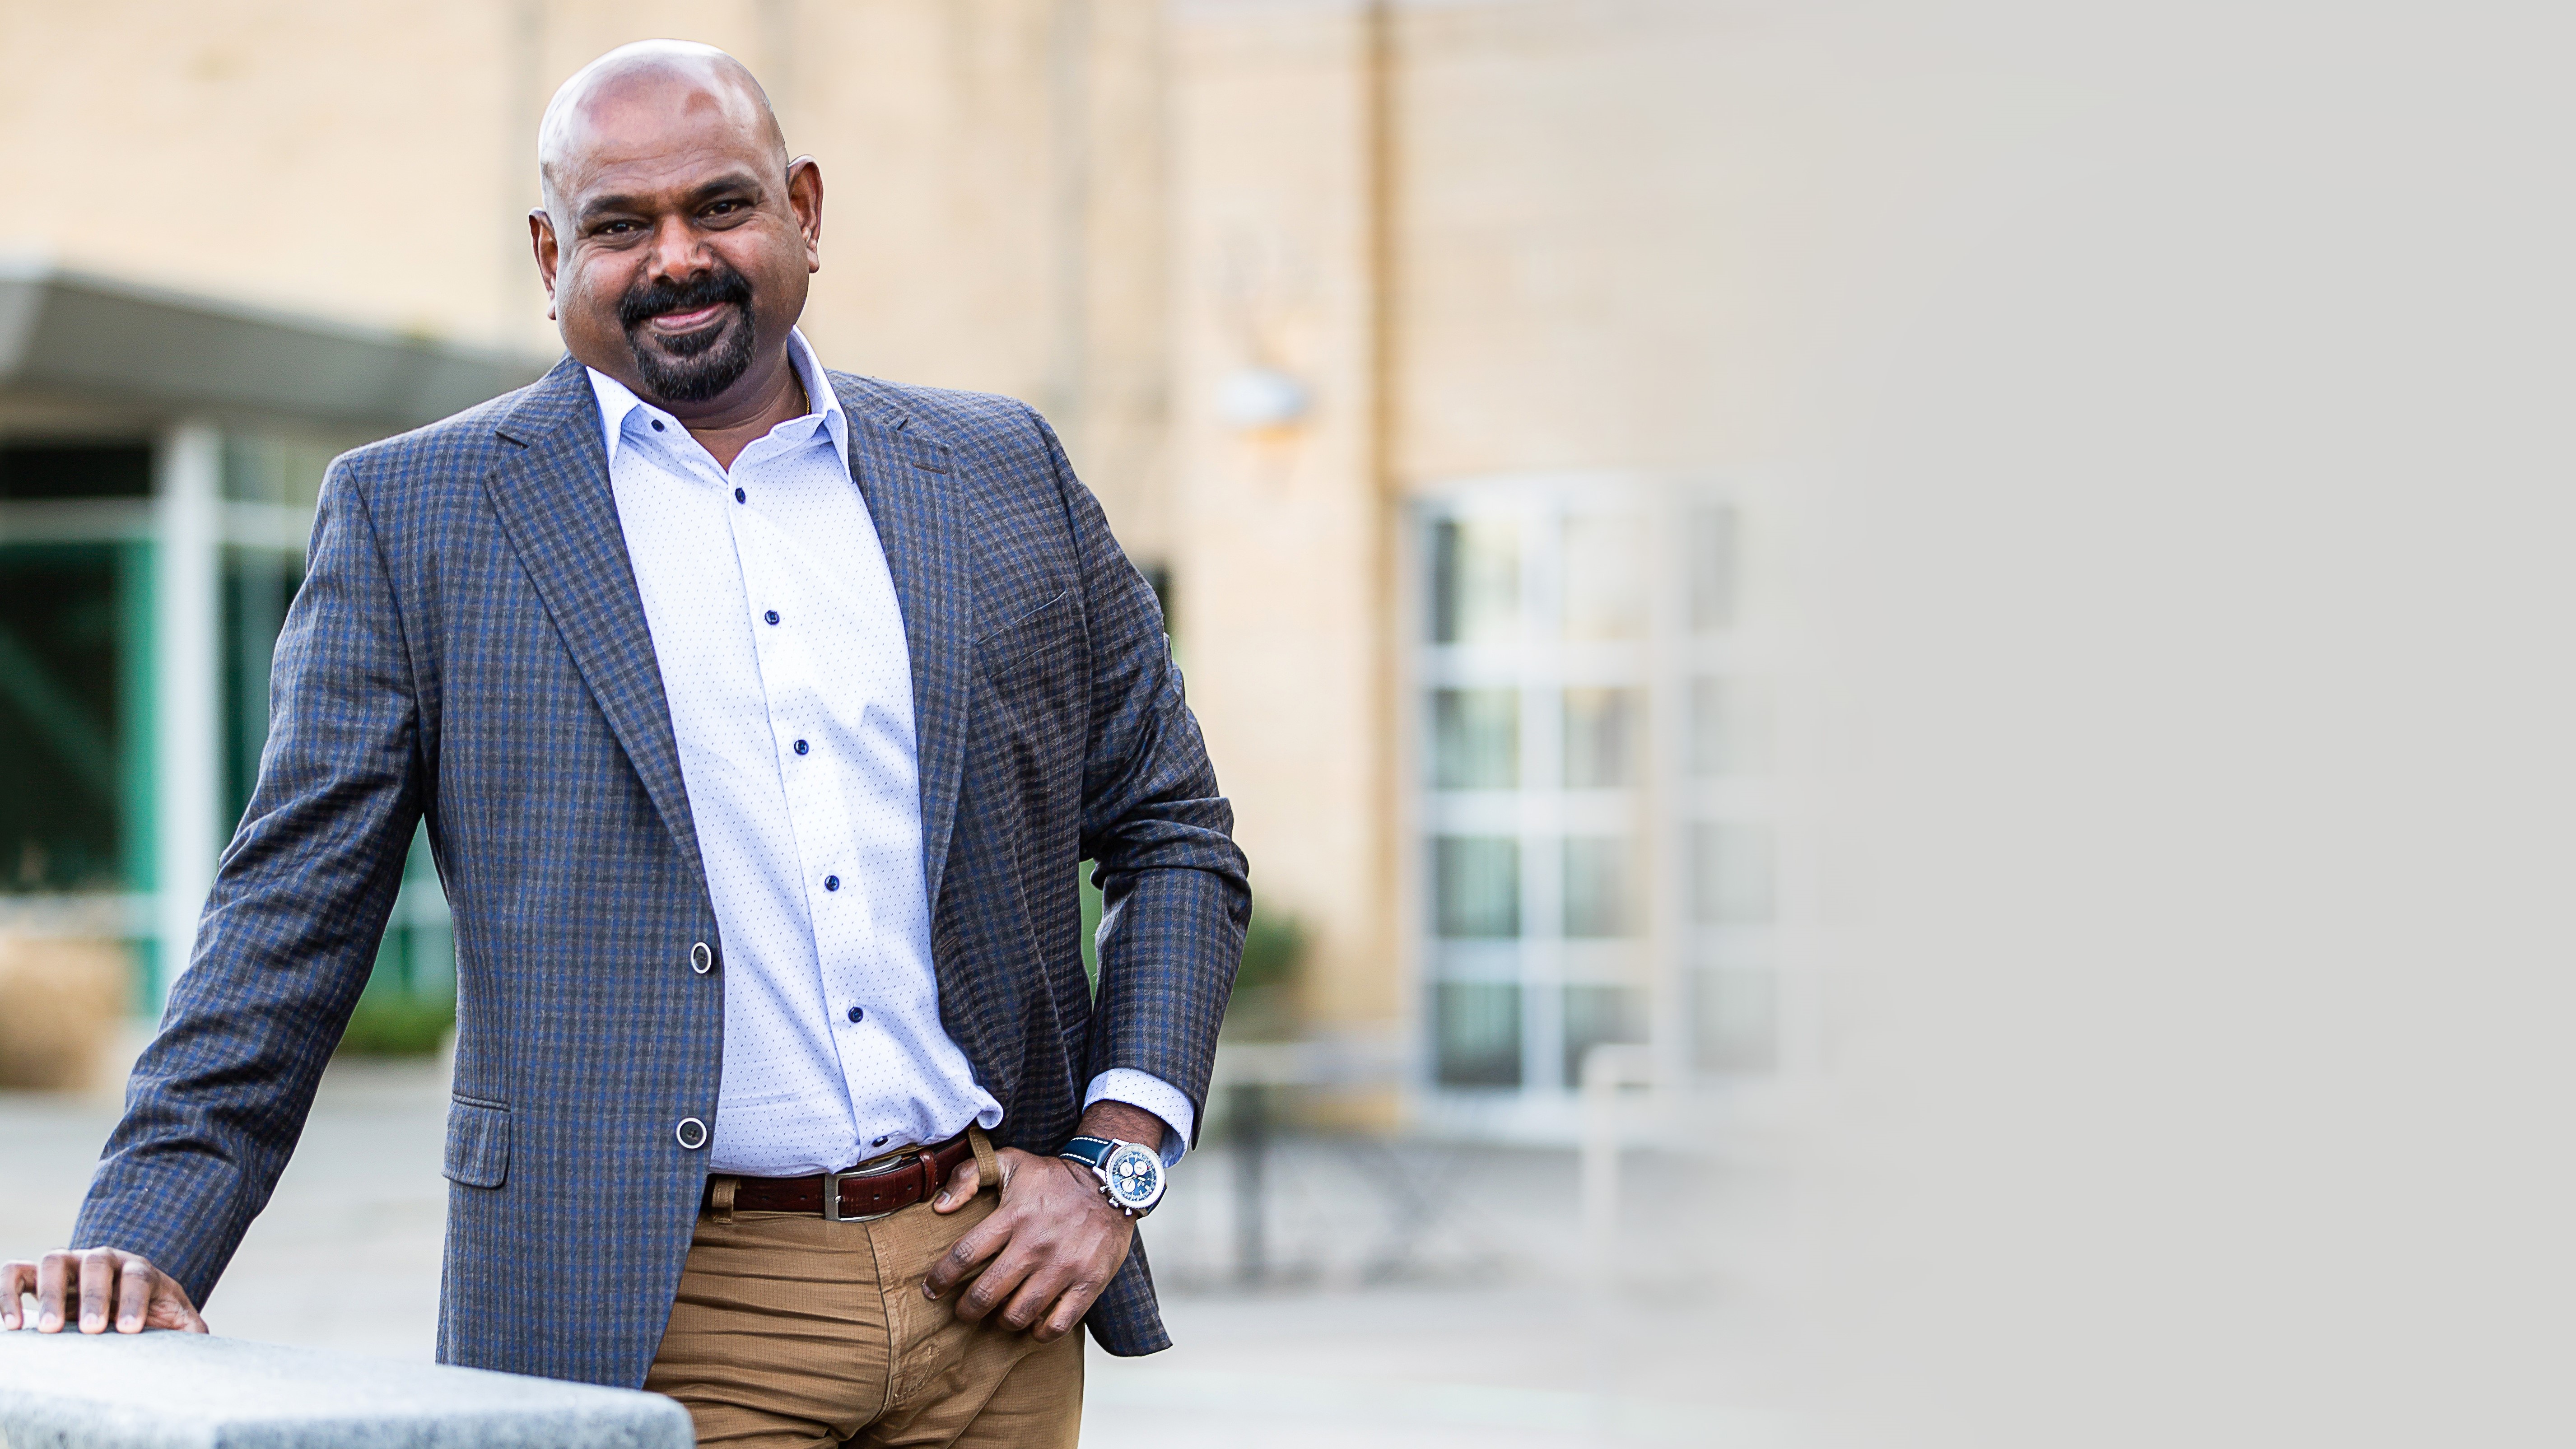 On LawNext: Exterro’s Bobby Balachandran, ‘LegalTech CEO of the Year,’ On Leadership, Growth and Plans for an IPO